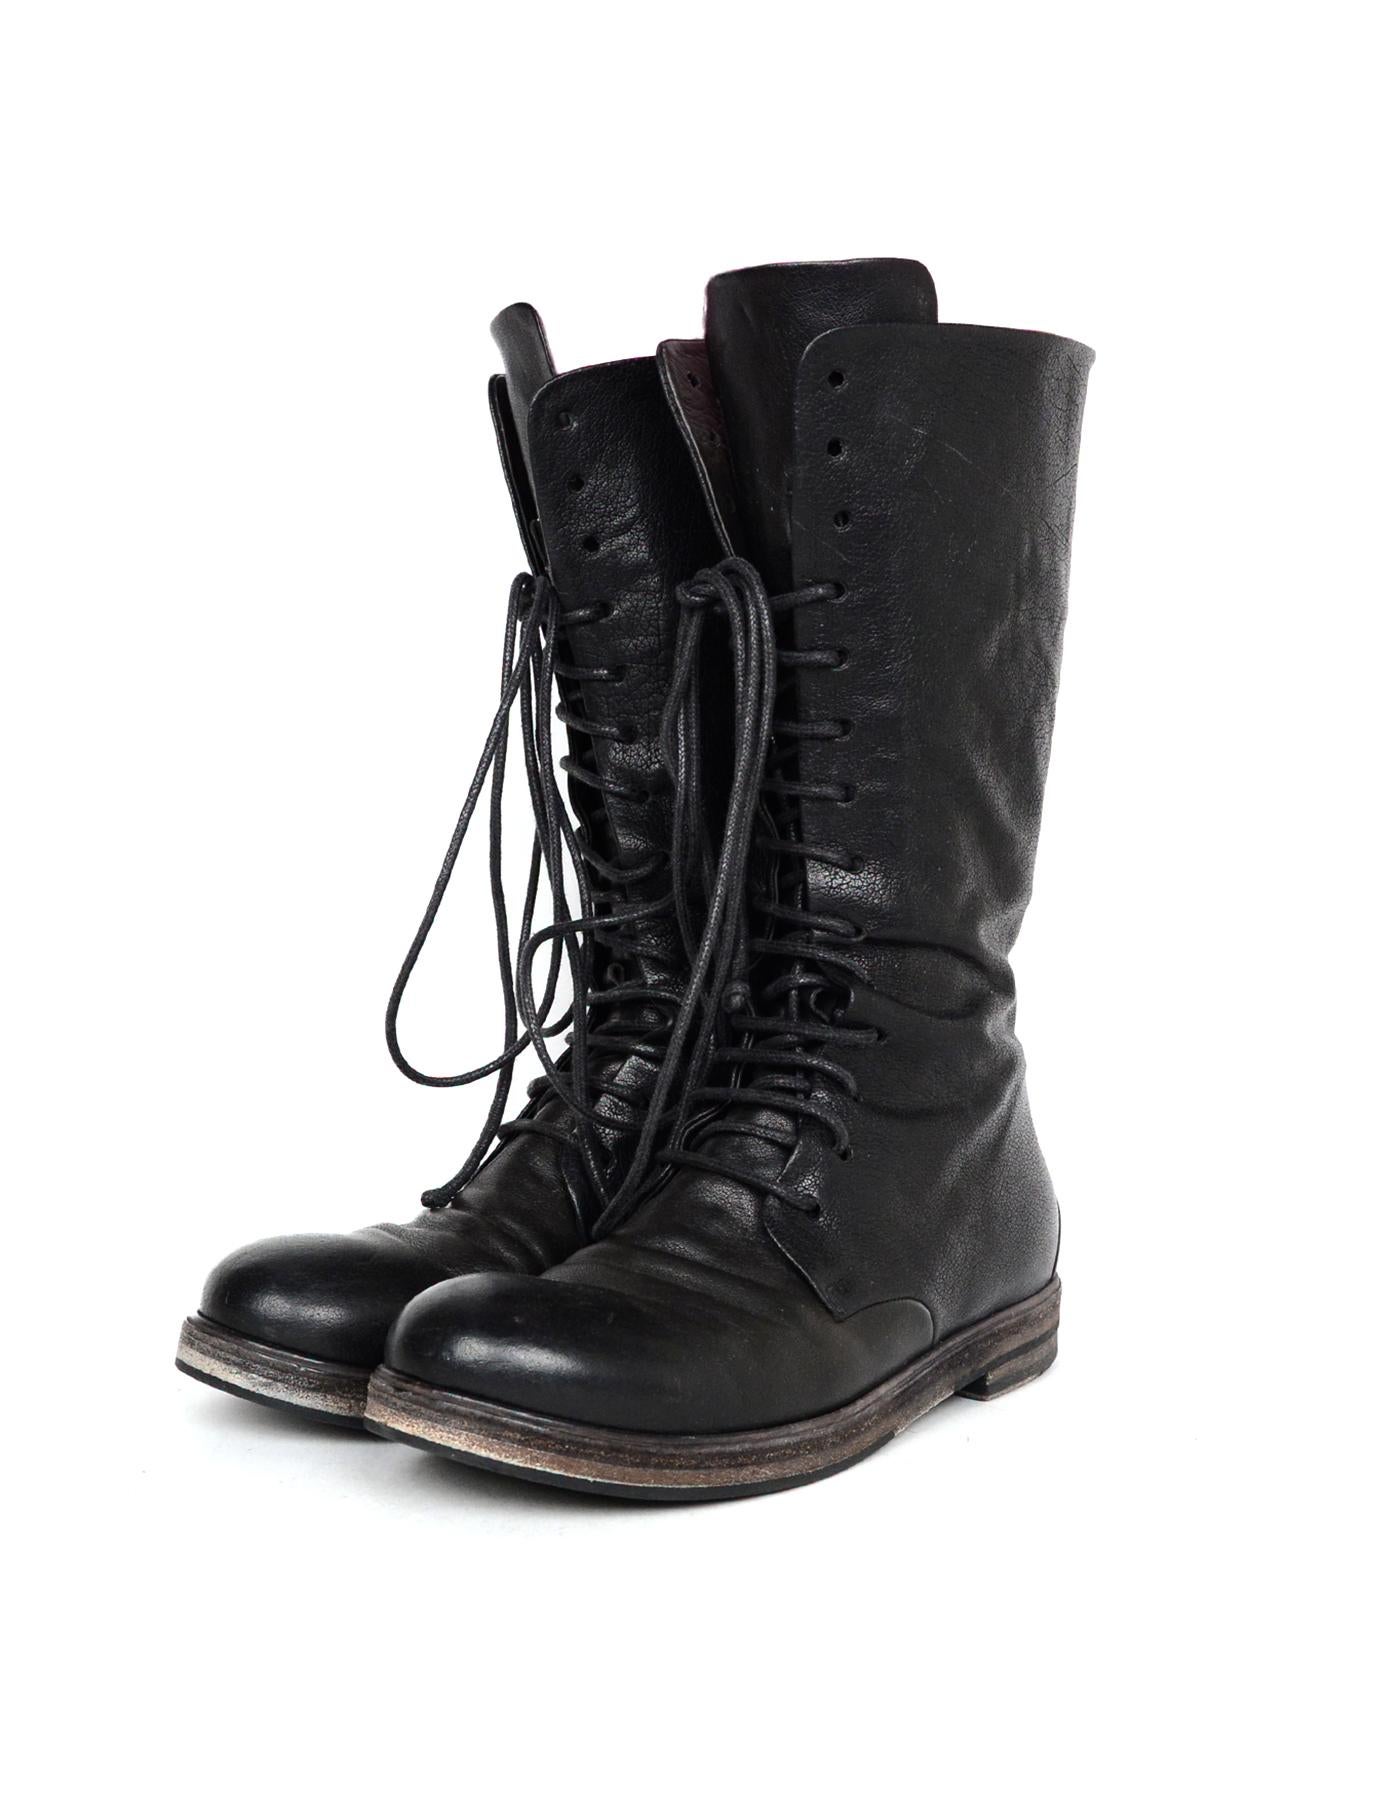 Marsell Black Leather Tall Lace Up Combat Boots Sz 37.5

Made In: Italy
Color: Black
Hardware: Antiqued silvertone
Materials: Leather, metal
Closure/Opening:  Rear zipper and front lace up
Overall Condition: Very good pre-owned condition with